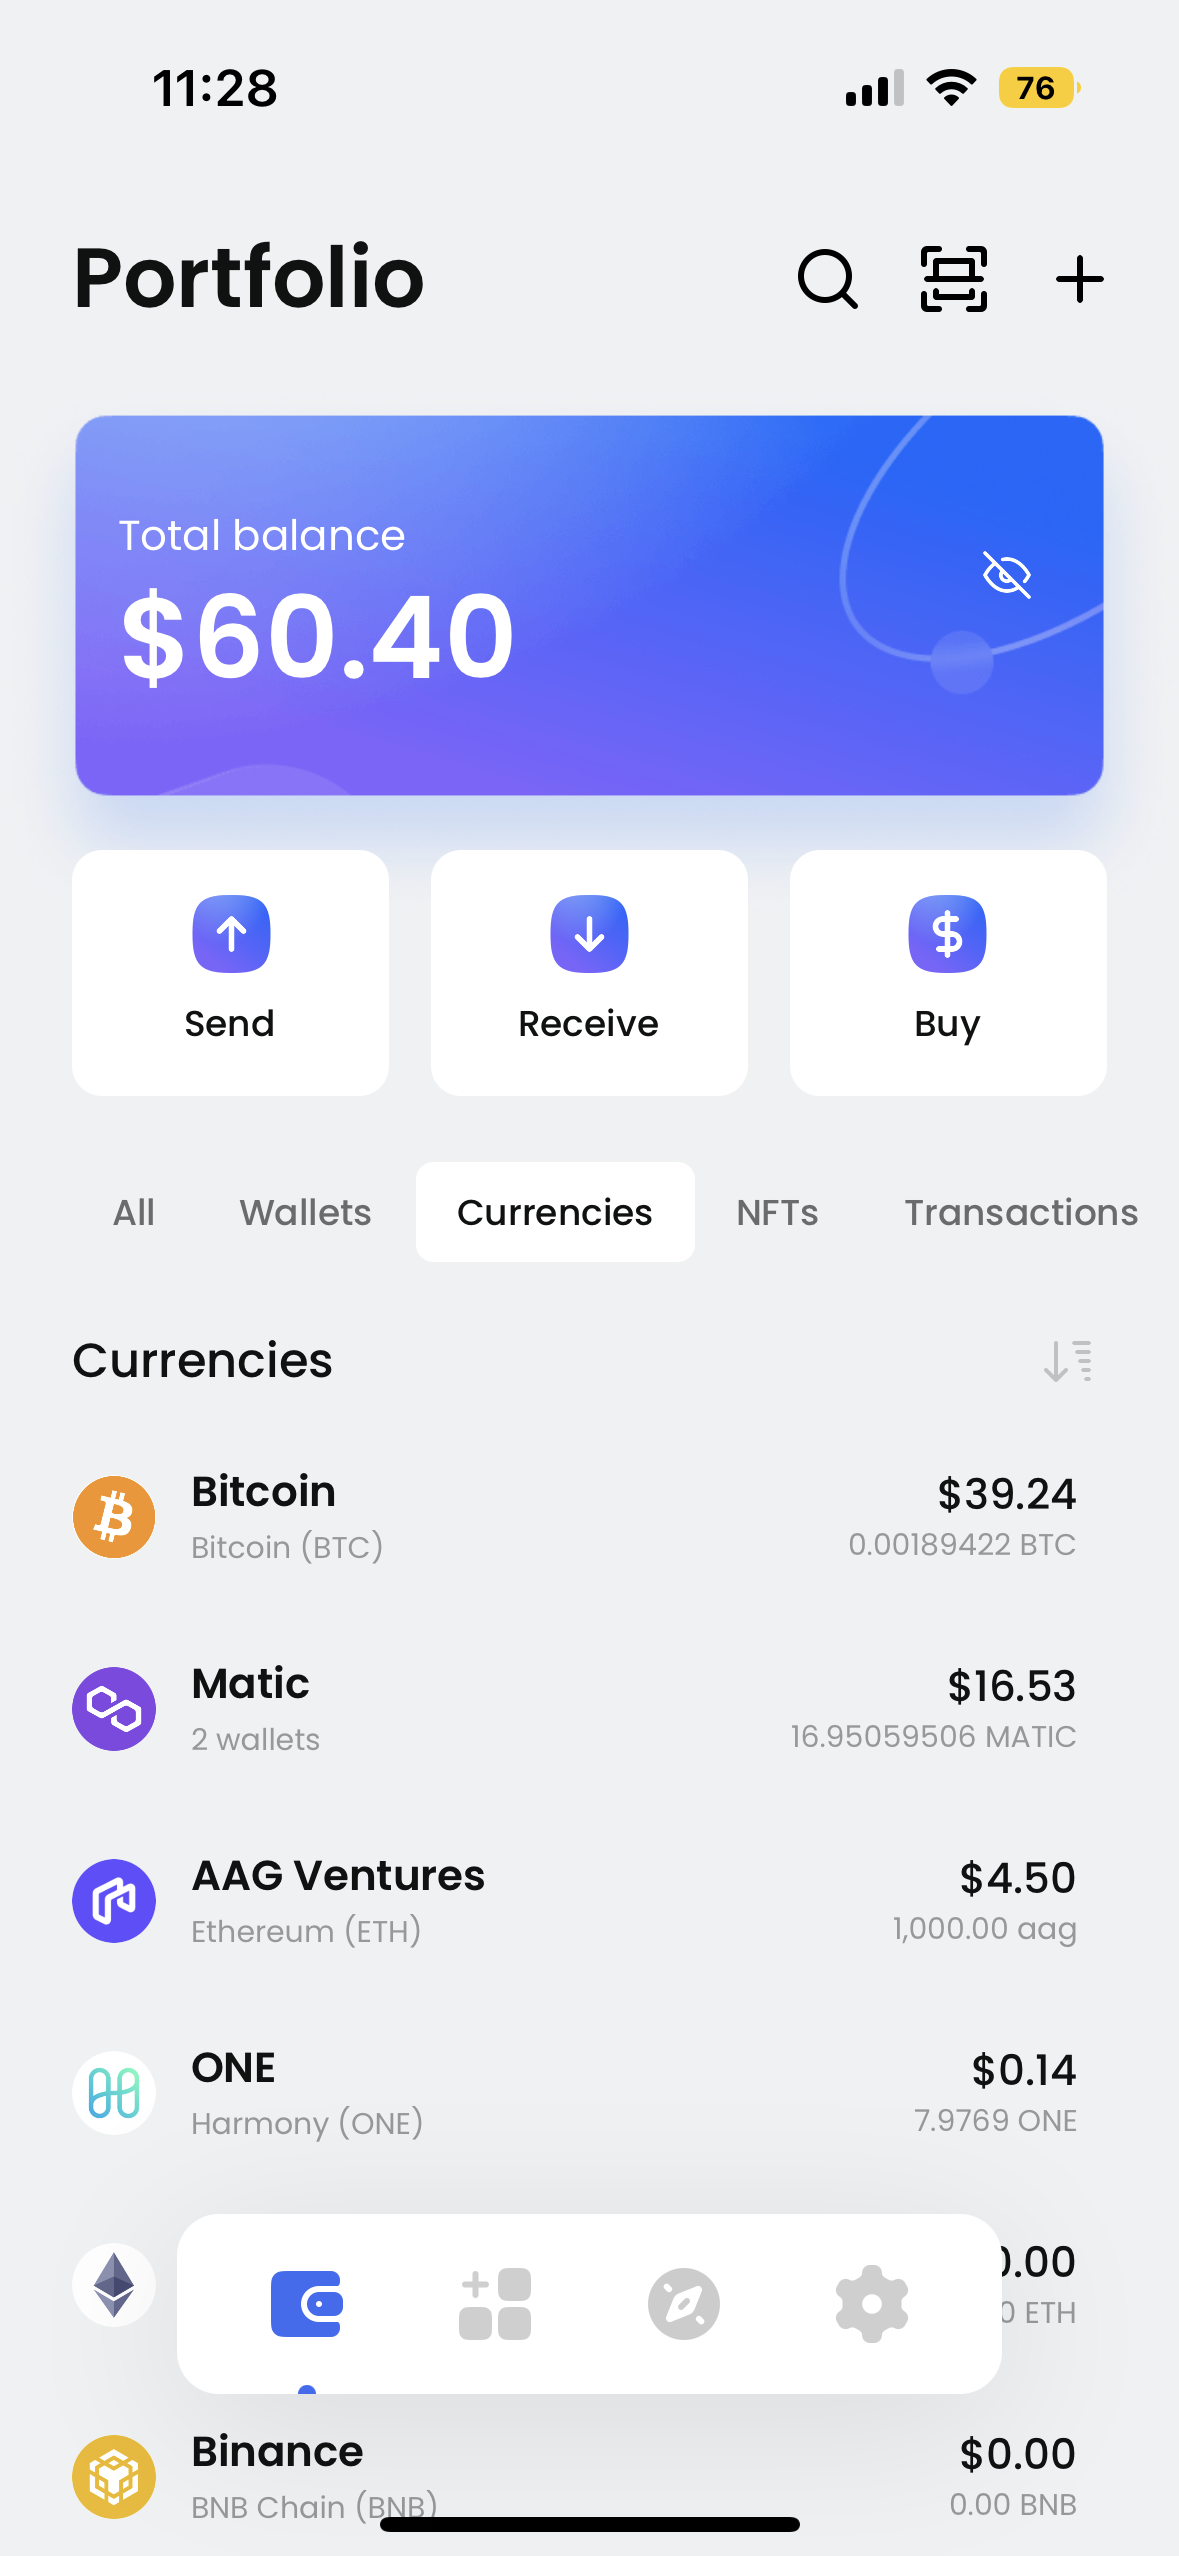 Pre-install tokens in user's wallet